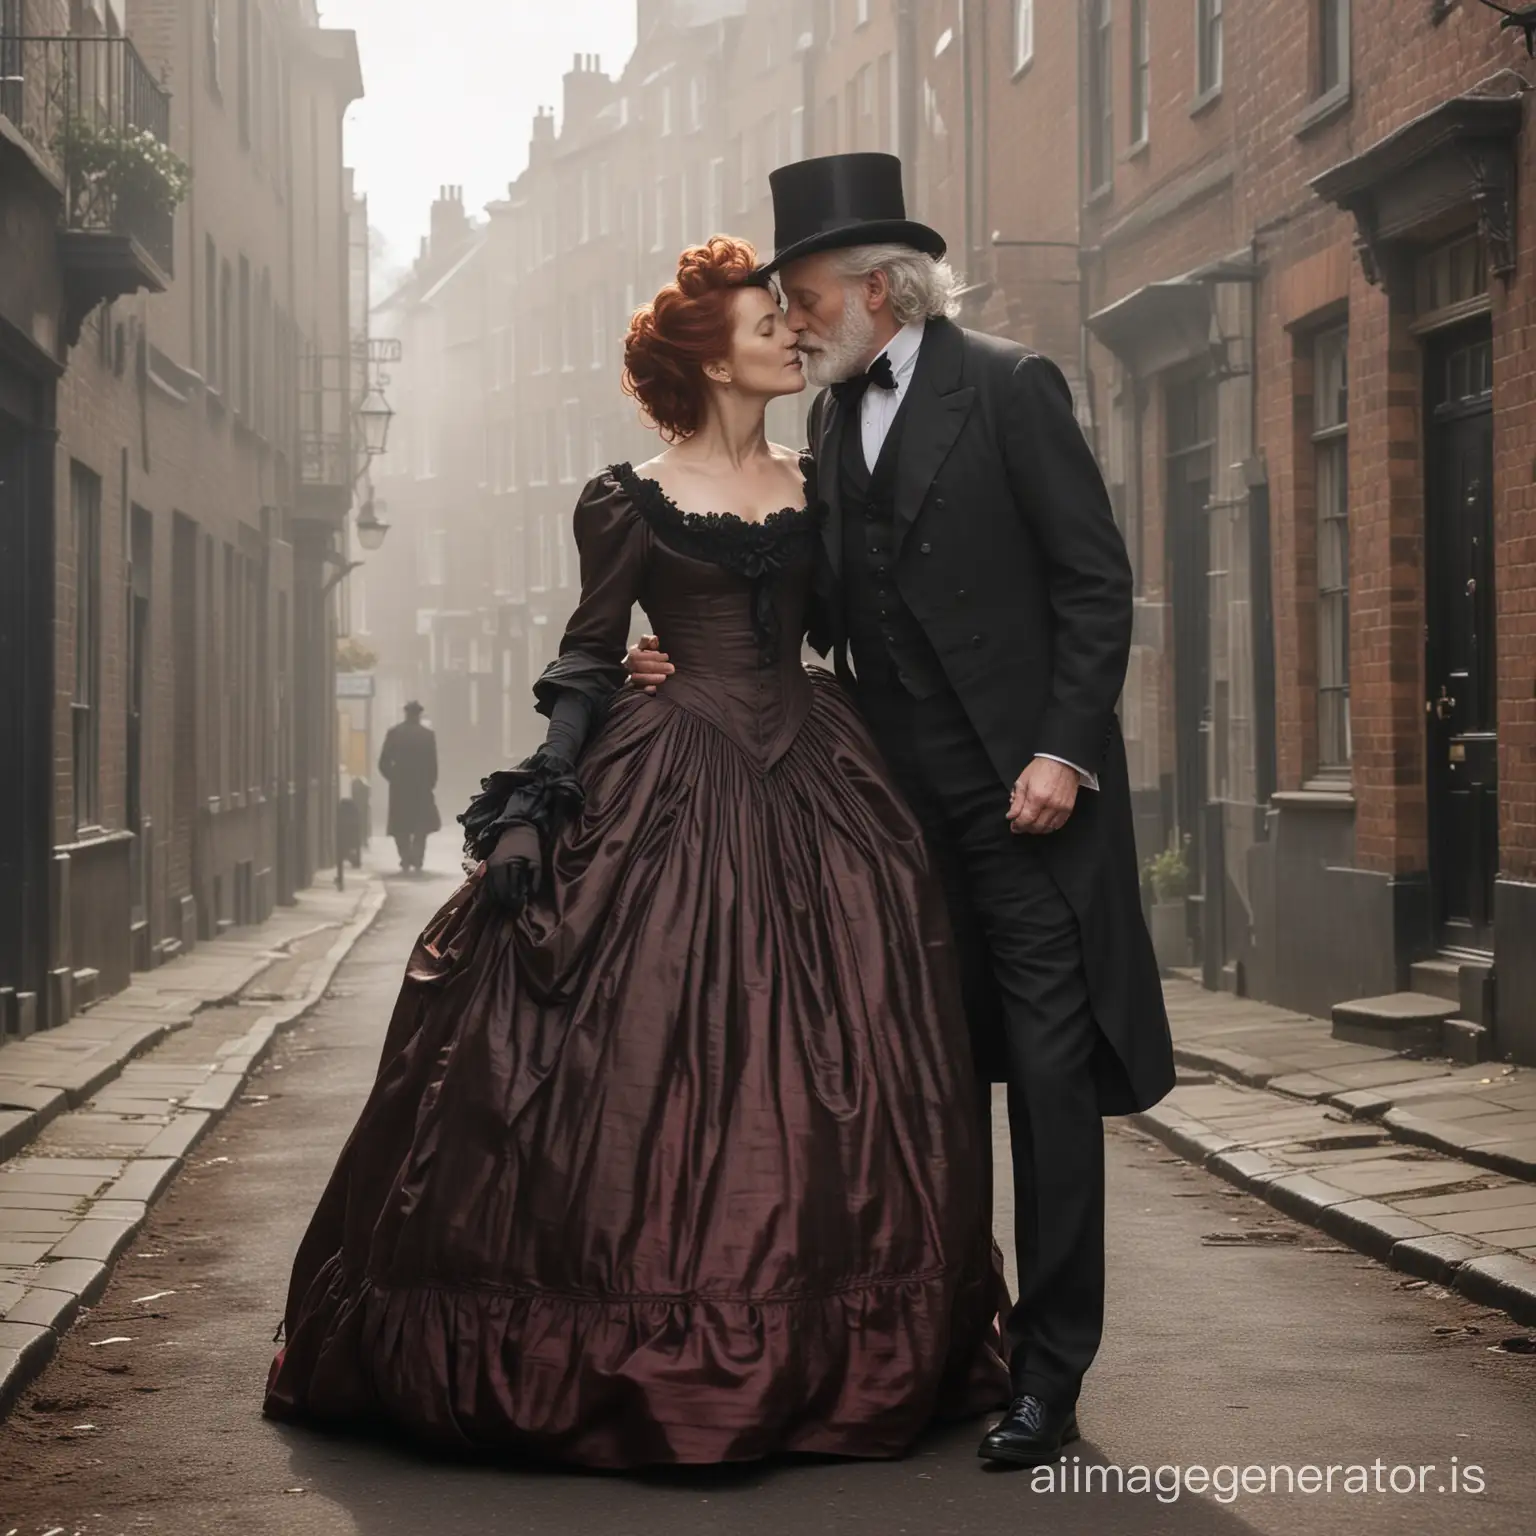 Victorian-Romance-Redhaired-Gillian-Anderson-and-Husband-Embrace-on-1860s-Street